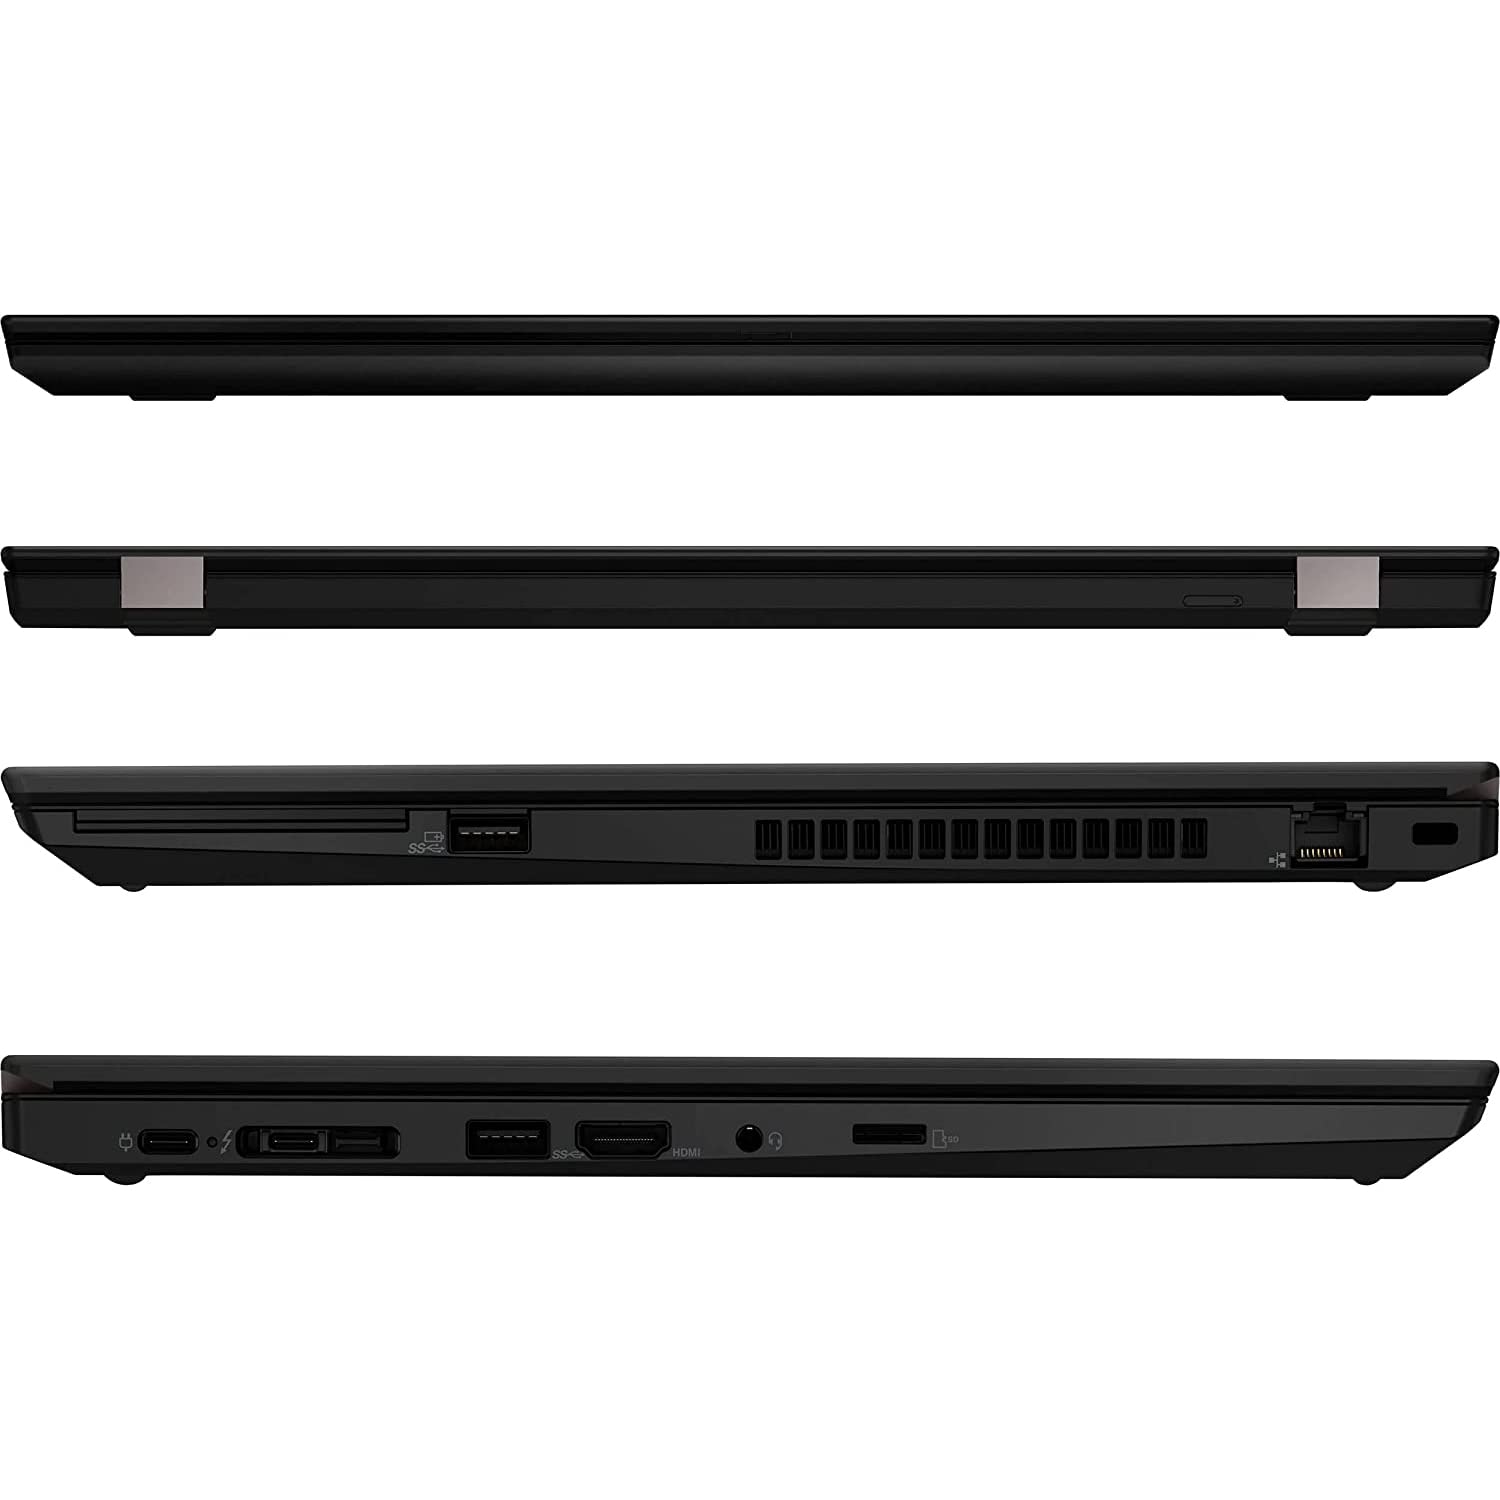 Lenovo ThinkPad T15 Gen 2 15.6" FHD Business Laptop Computer, Intel Core i7-1165G7 up to 4.7GHz, 32GB DDR4 RAM, 1TB PCIe SSD, WiFi 6E, Bluetooth 5.1, Thunderbolt 4, Windows 10 Pro, BROAG Cable